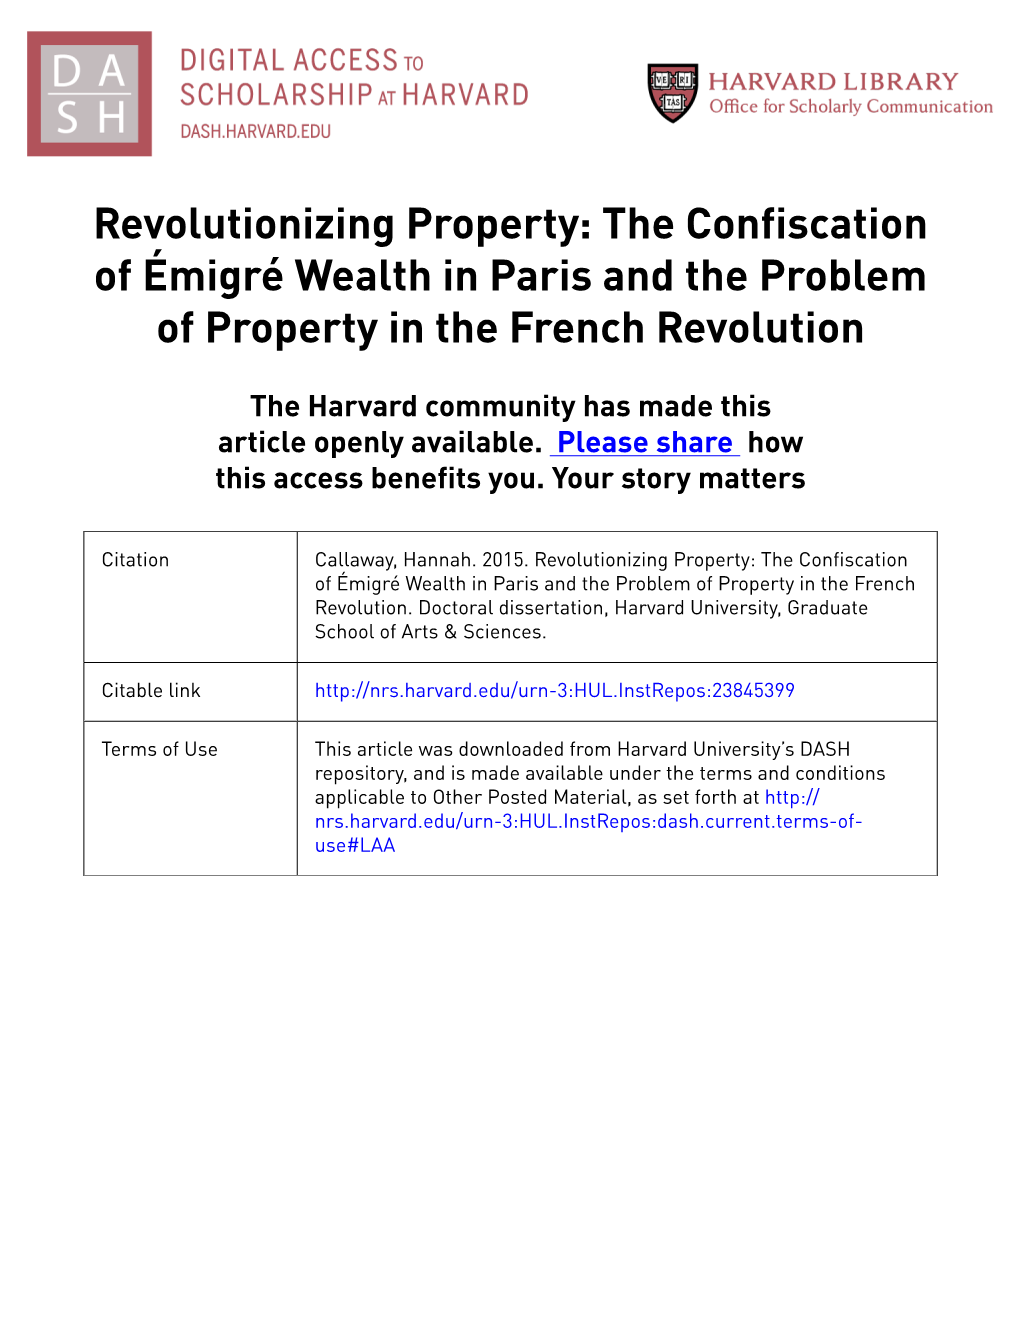 The Confiscation of Émigré Wealth in Paris and the Problem of Property in the French Revolution